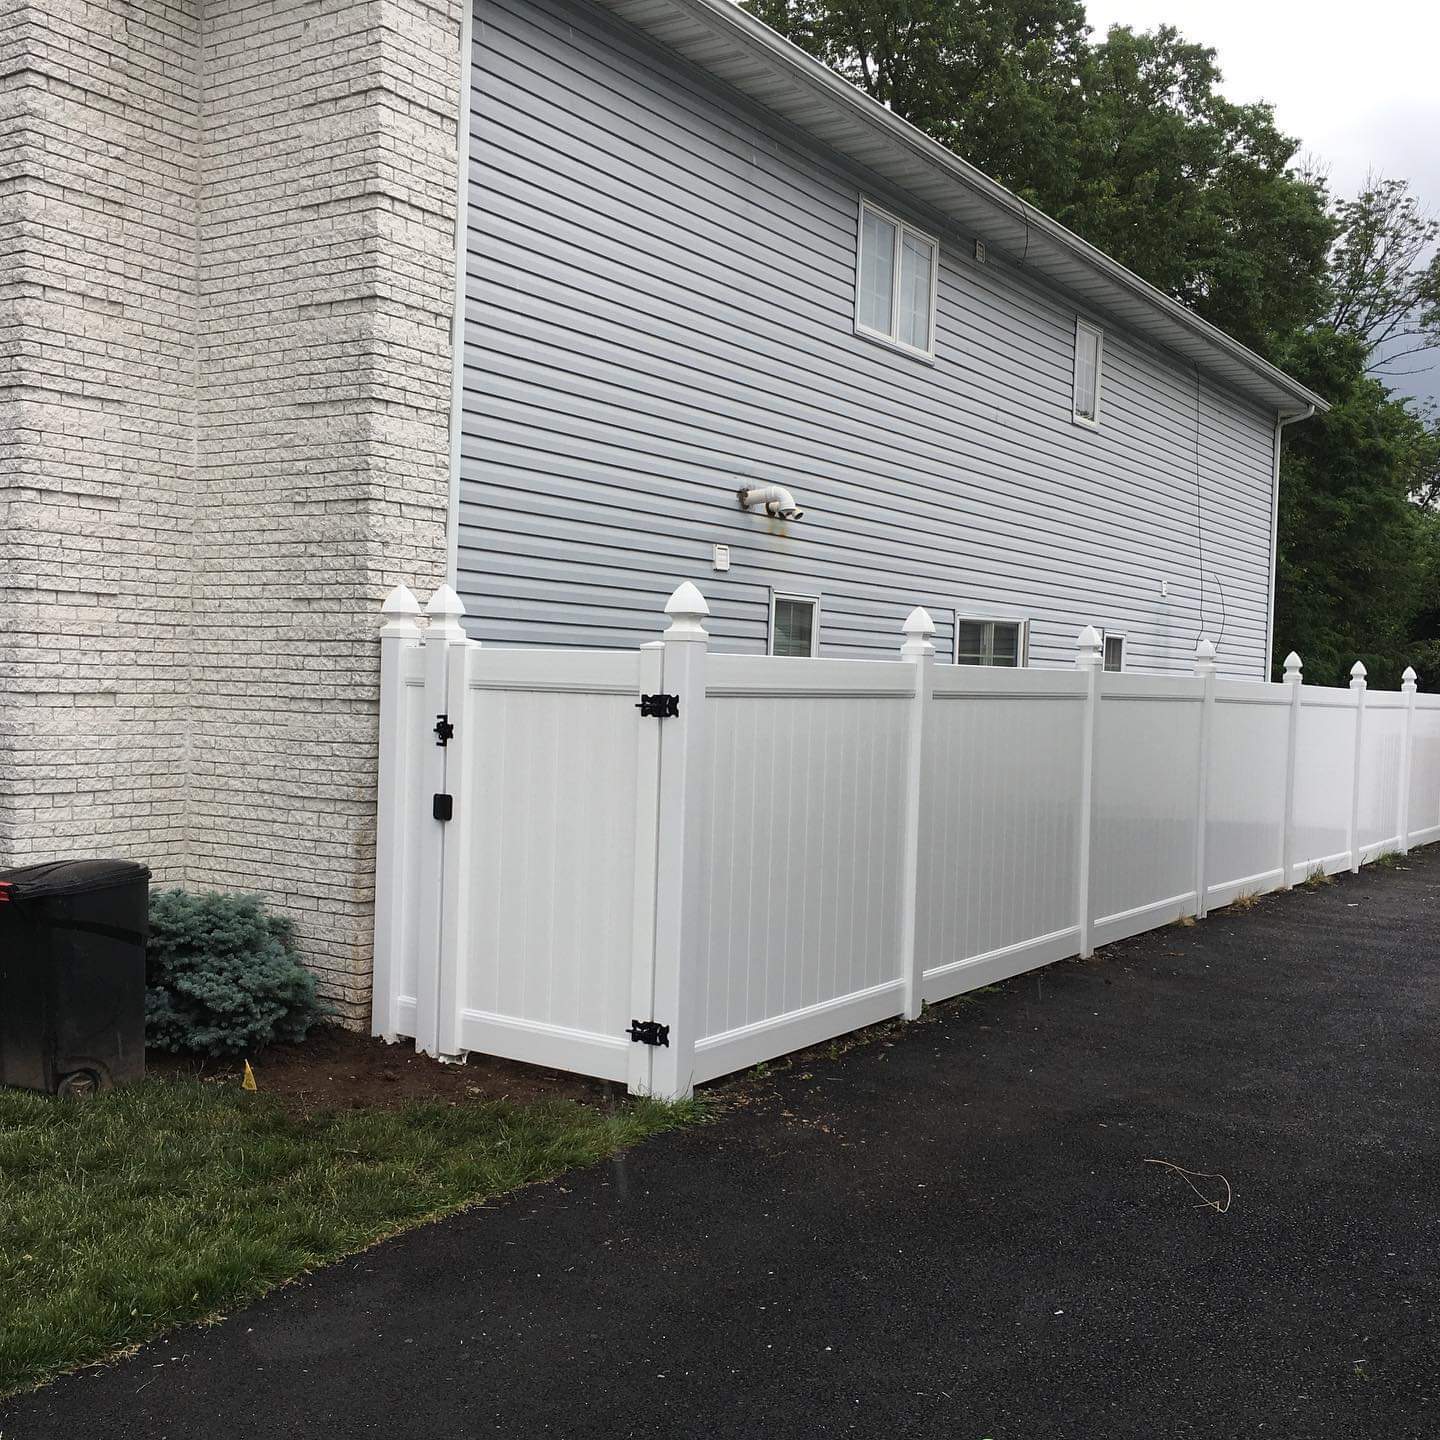 7 Tips for Choosing a Fence to Last through Winter in Monmouth County, NJ